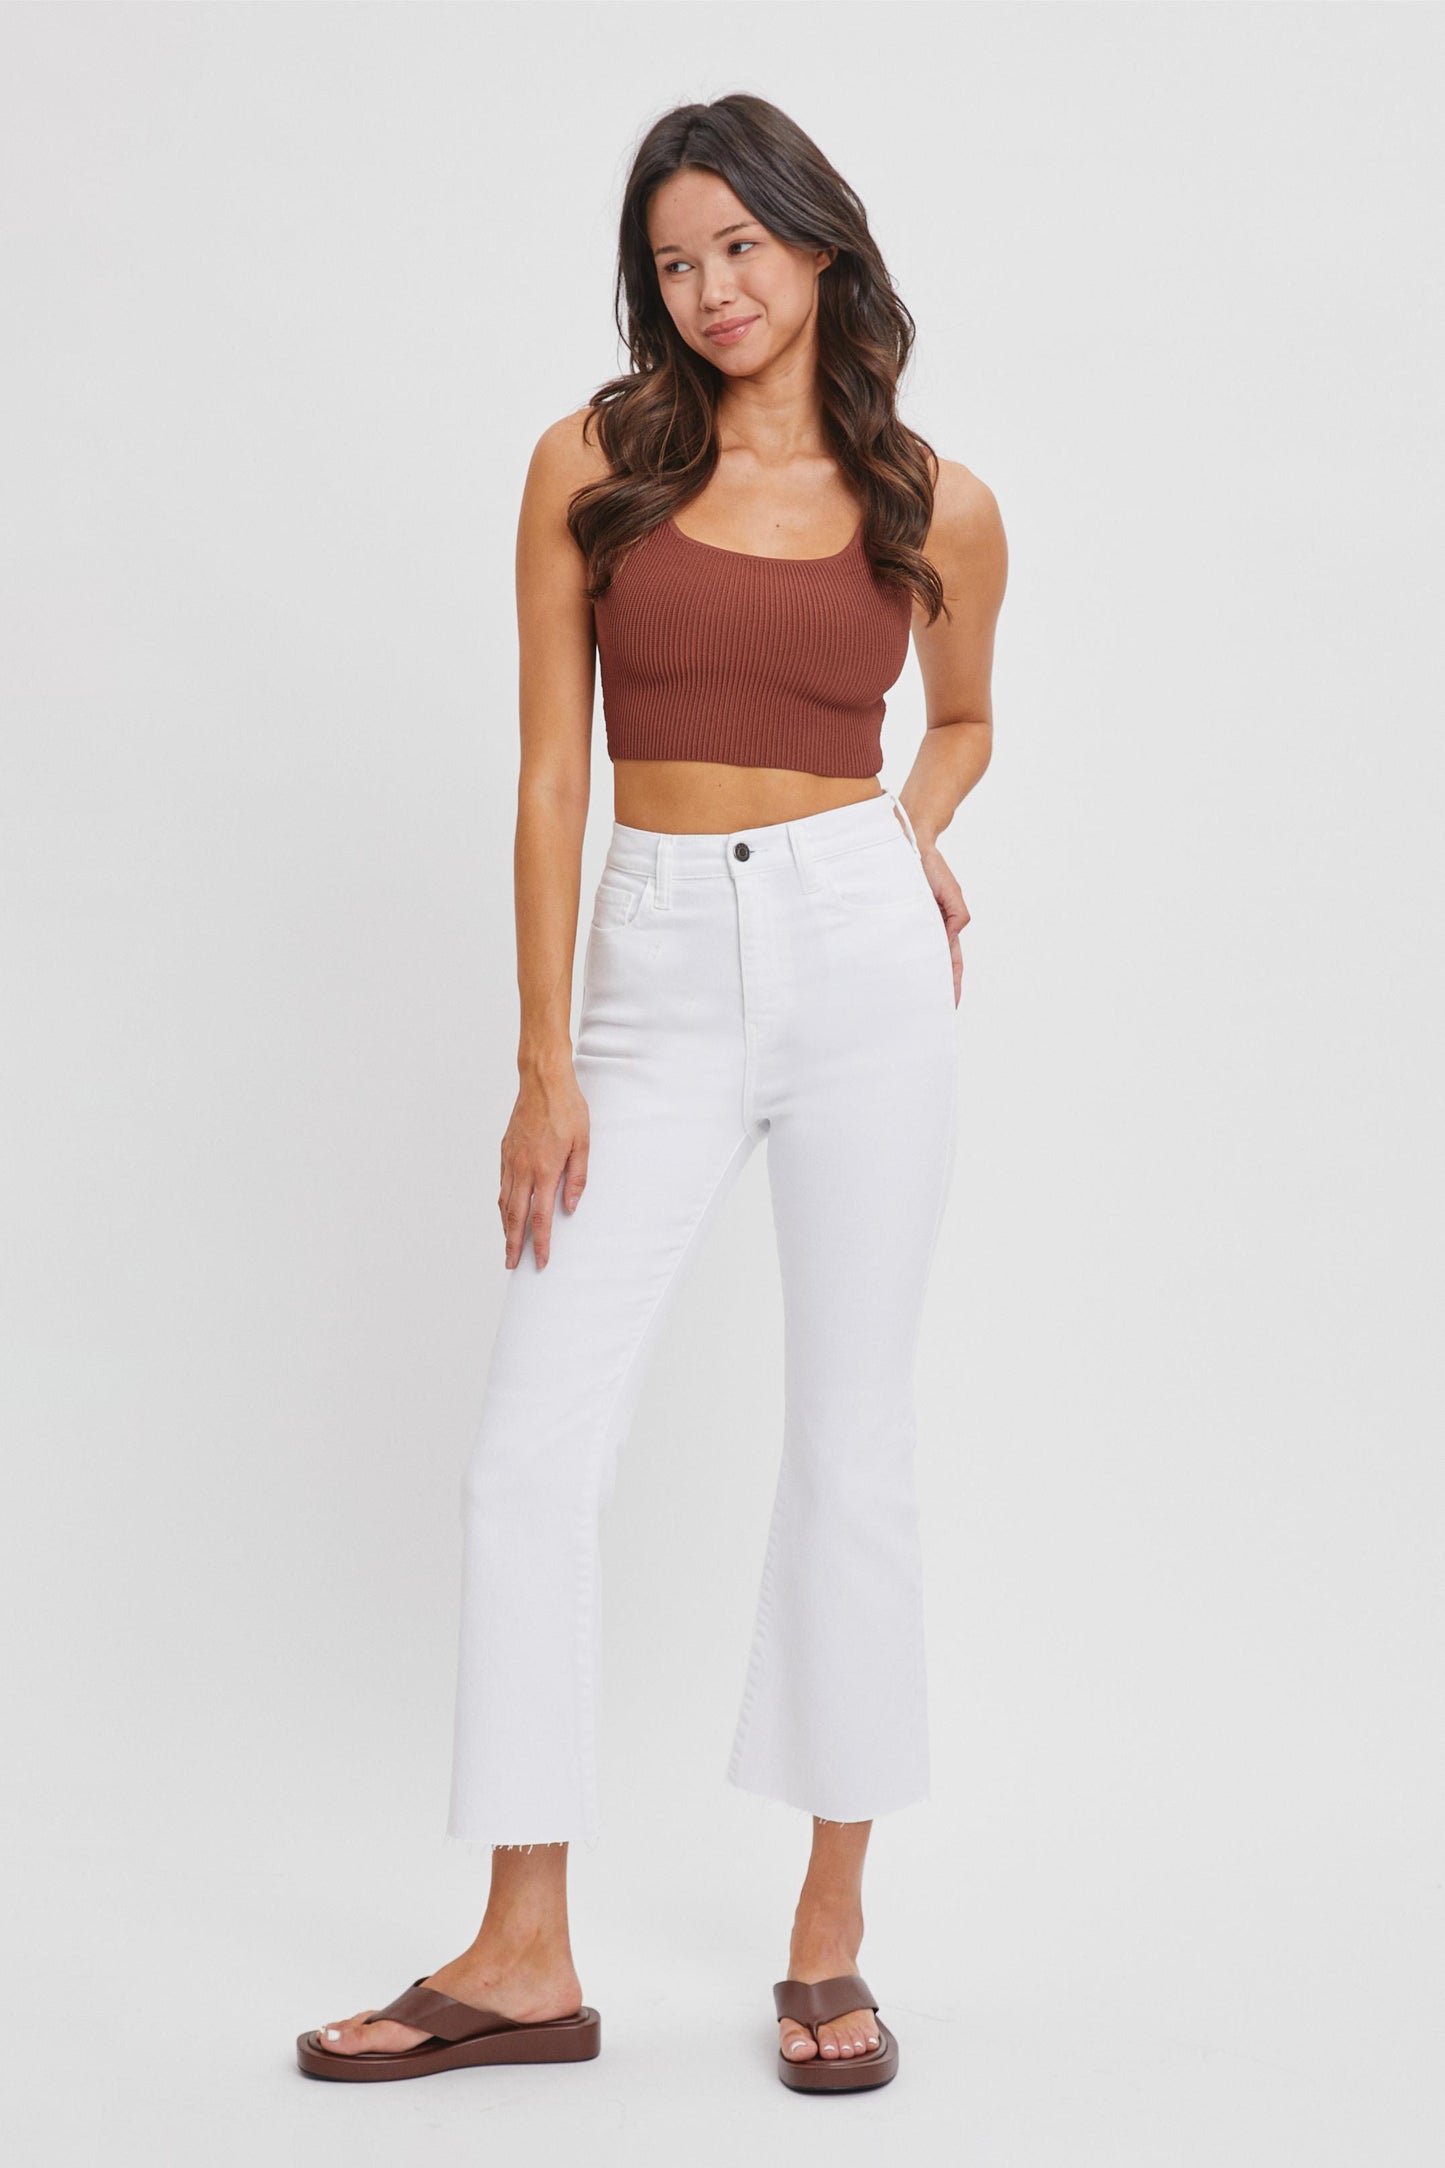 White Cropped Jeans